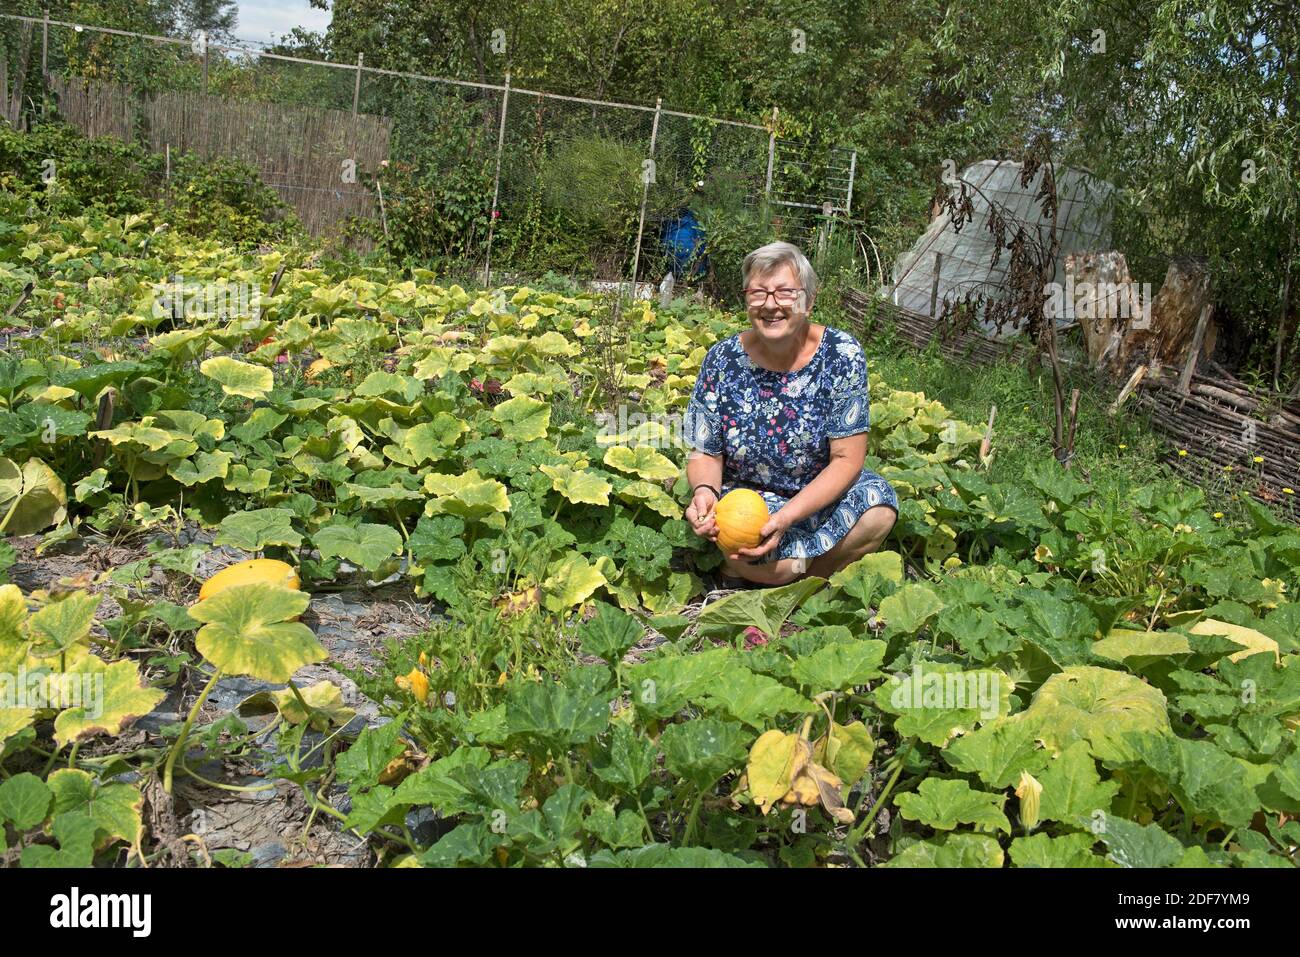 Regine Lassince, who offers breakfast based on the products of her garden on a plot called ''Le Paradis'', in the Marshes of the Yèvre and Voiselle, Stock Photo